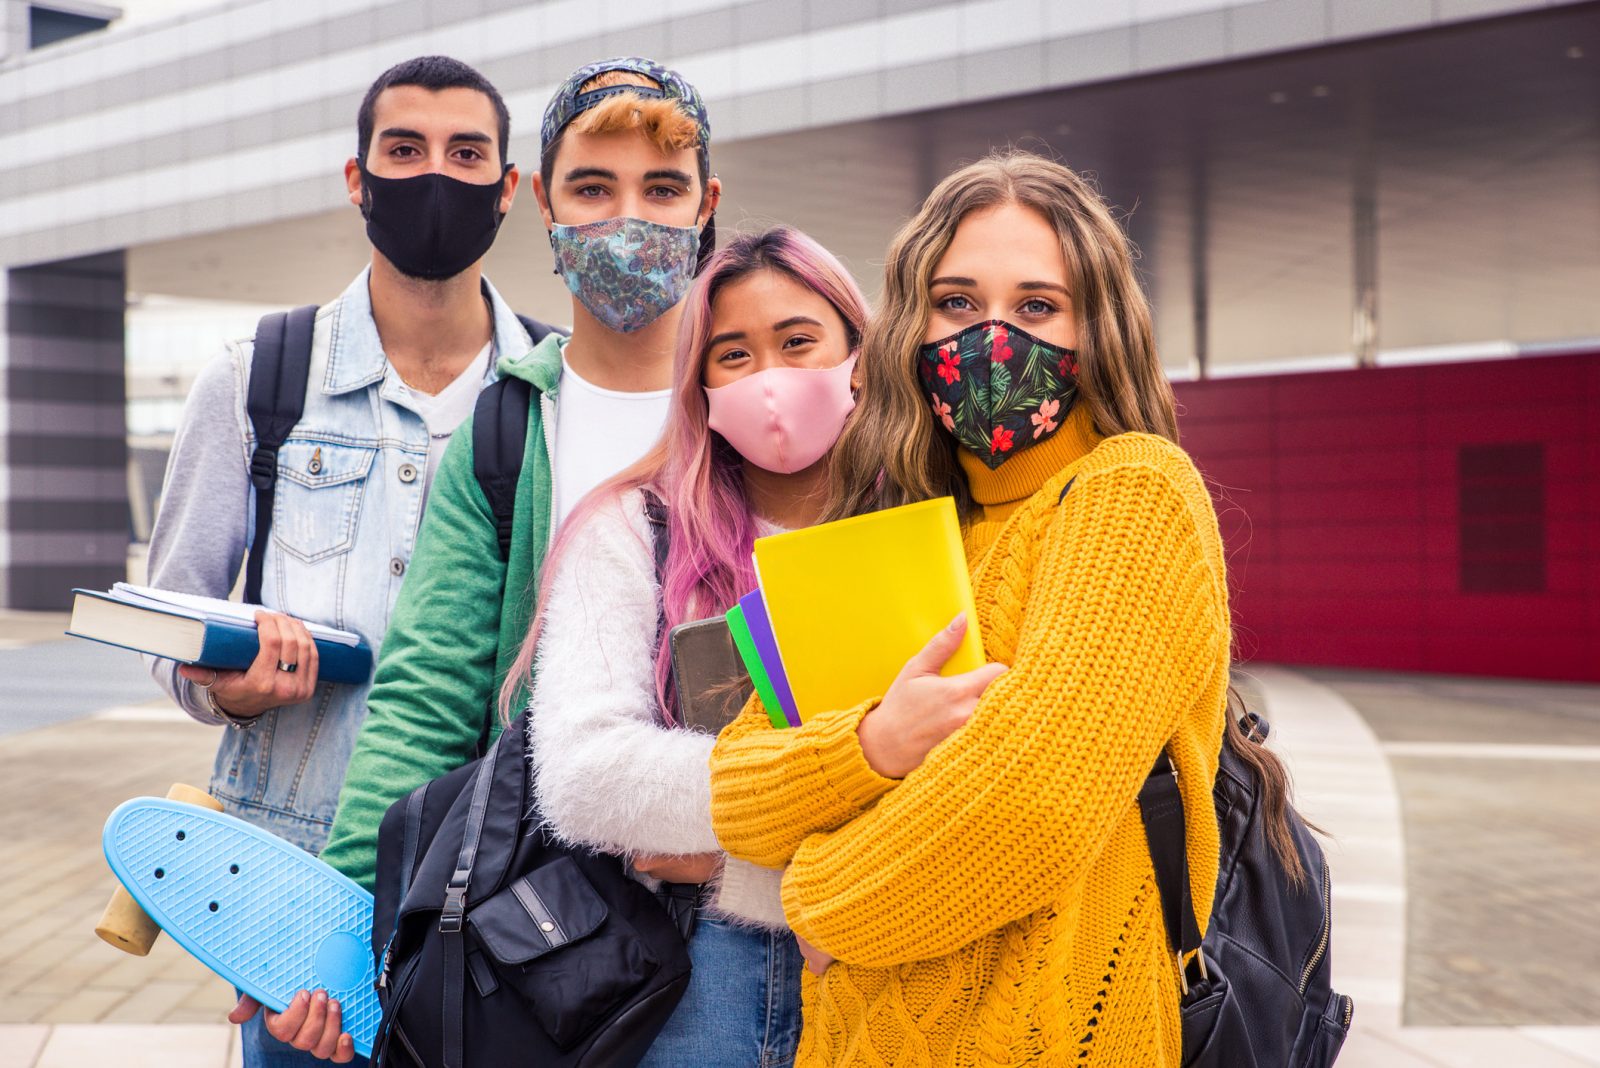 Four masked teenagers carrying books and a skateboard stand together in front of a building